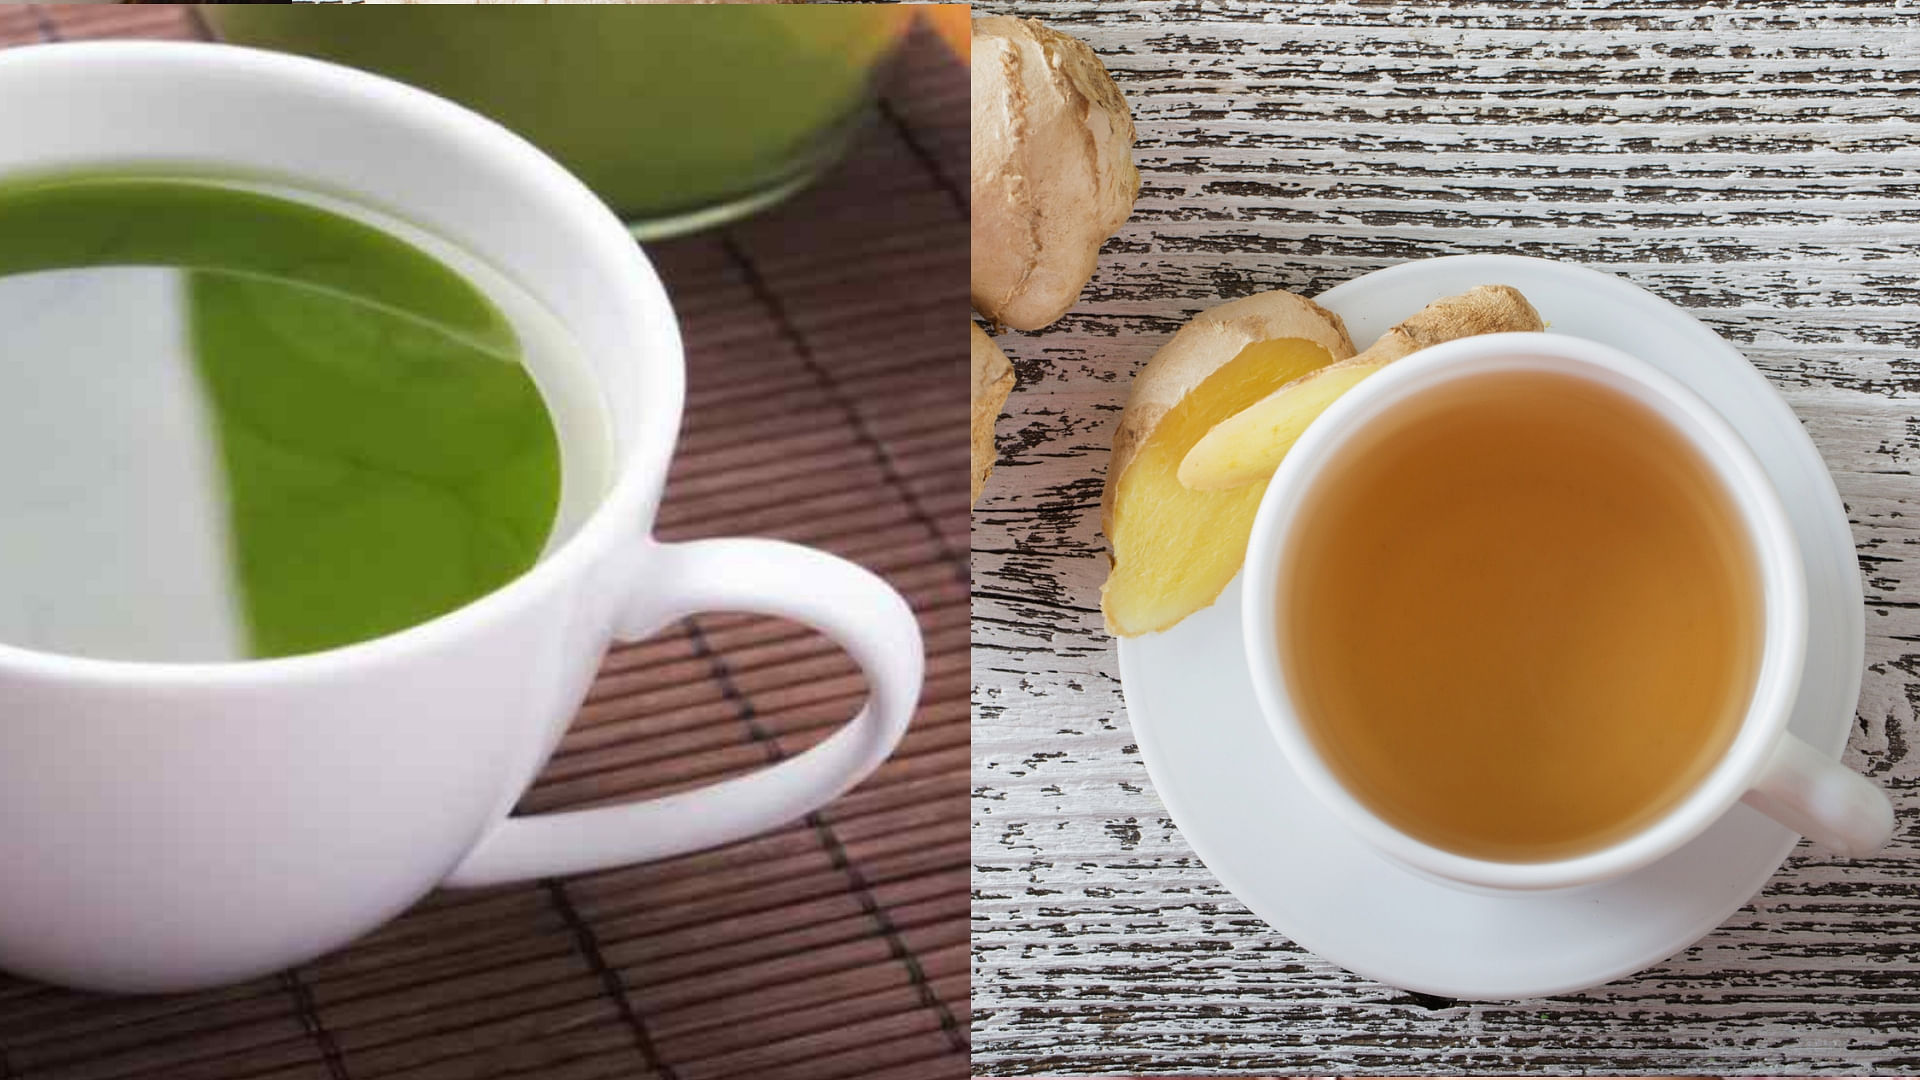 Green tea is only for those who sell it: Celebrity nutritionist Rujuta Diwekar